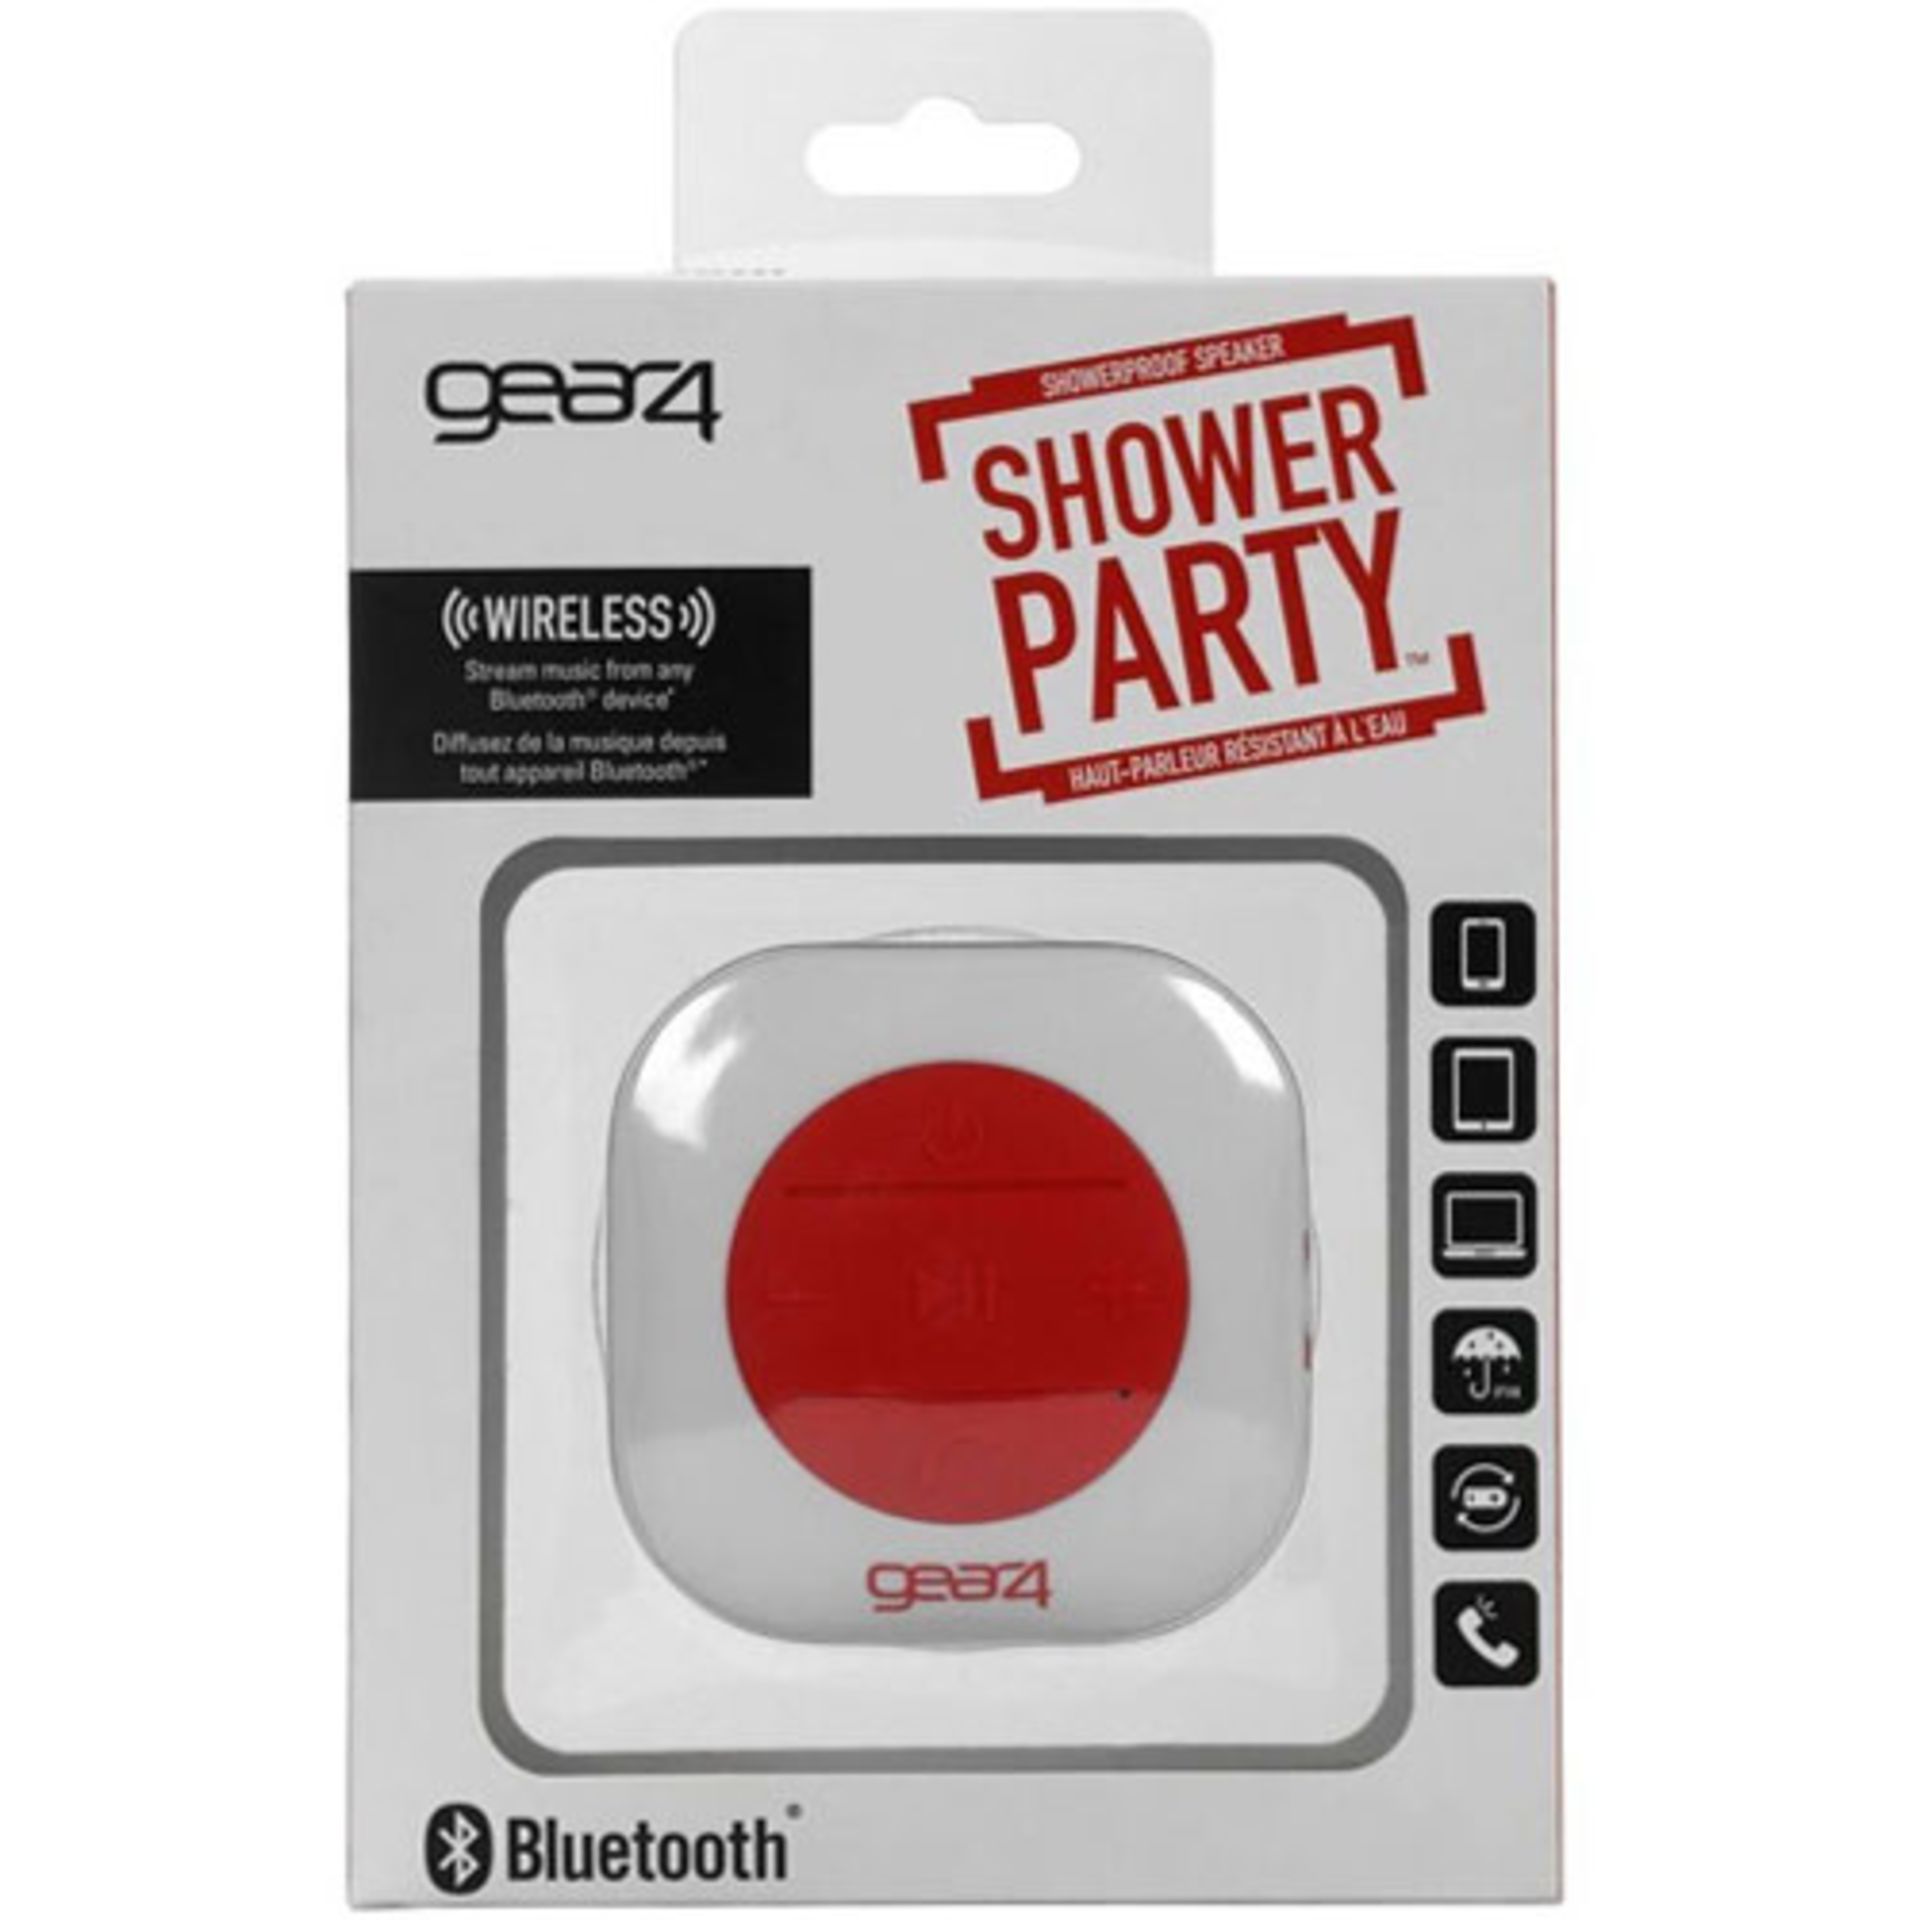 V *TRADE QTY* Brand New Gear4 Shower Party Wireless Speaker With Bluetooth - Showerproof - Play/ - Image 3 of 3